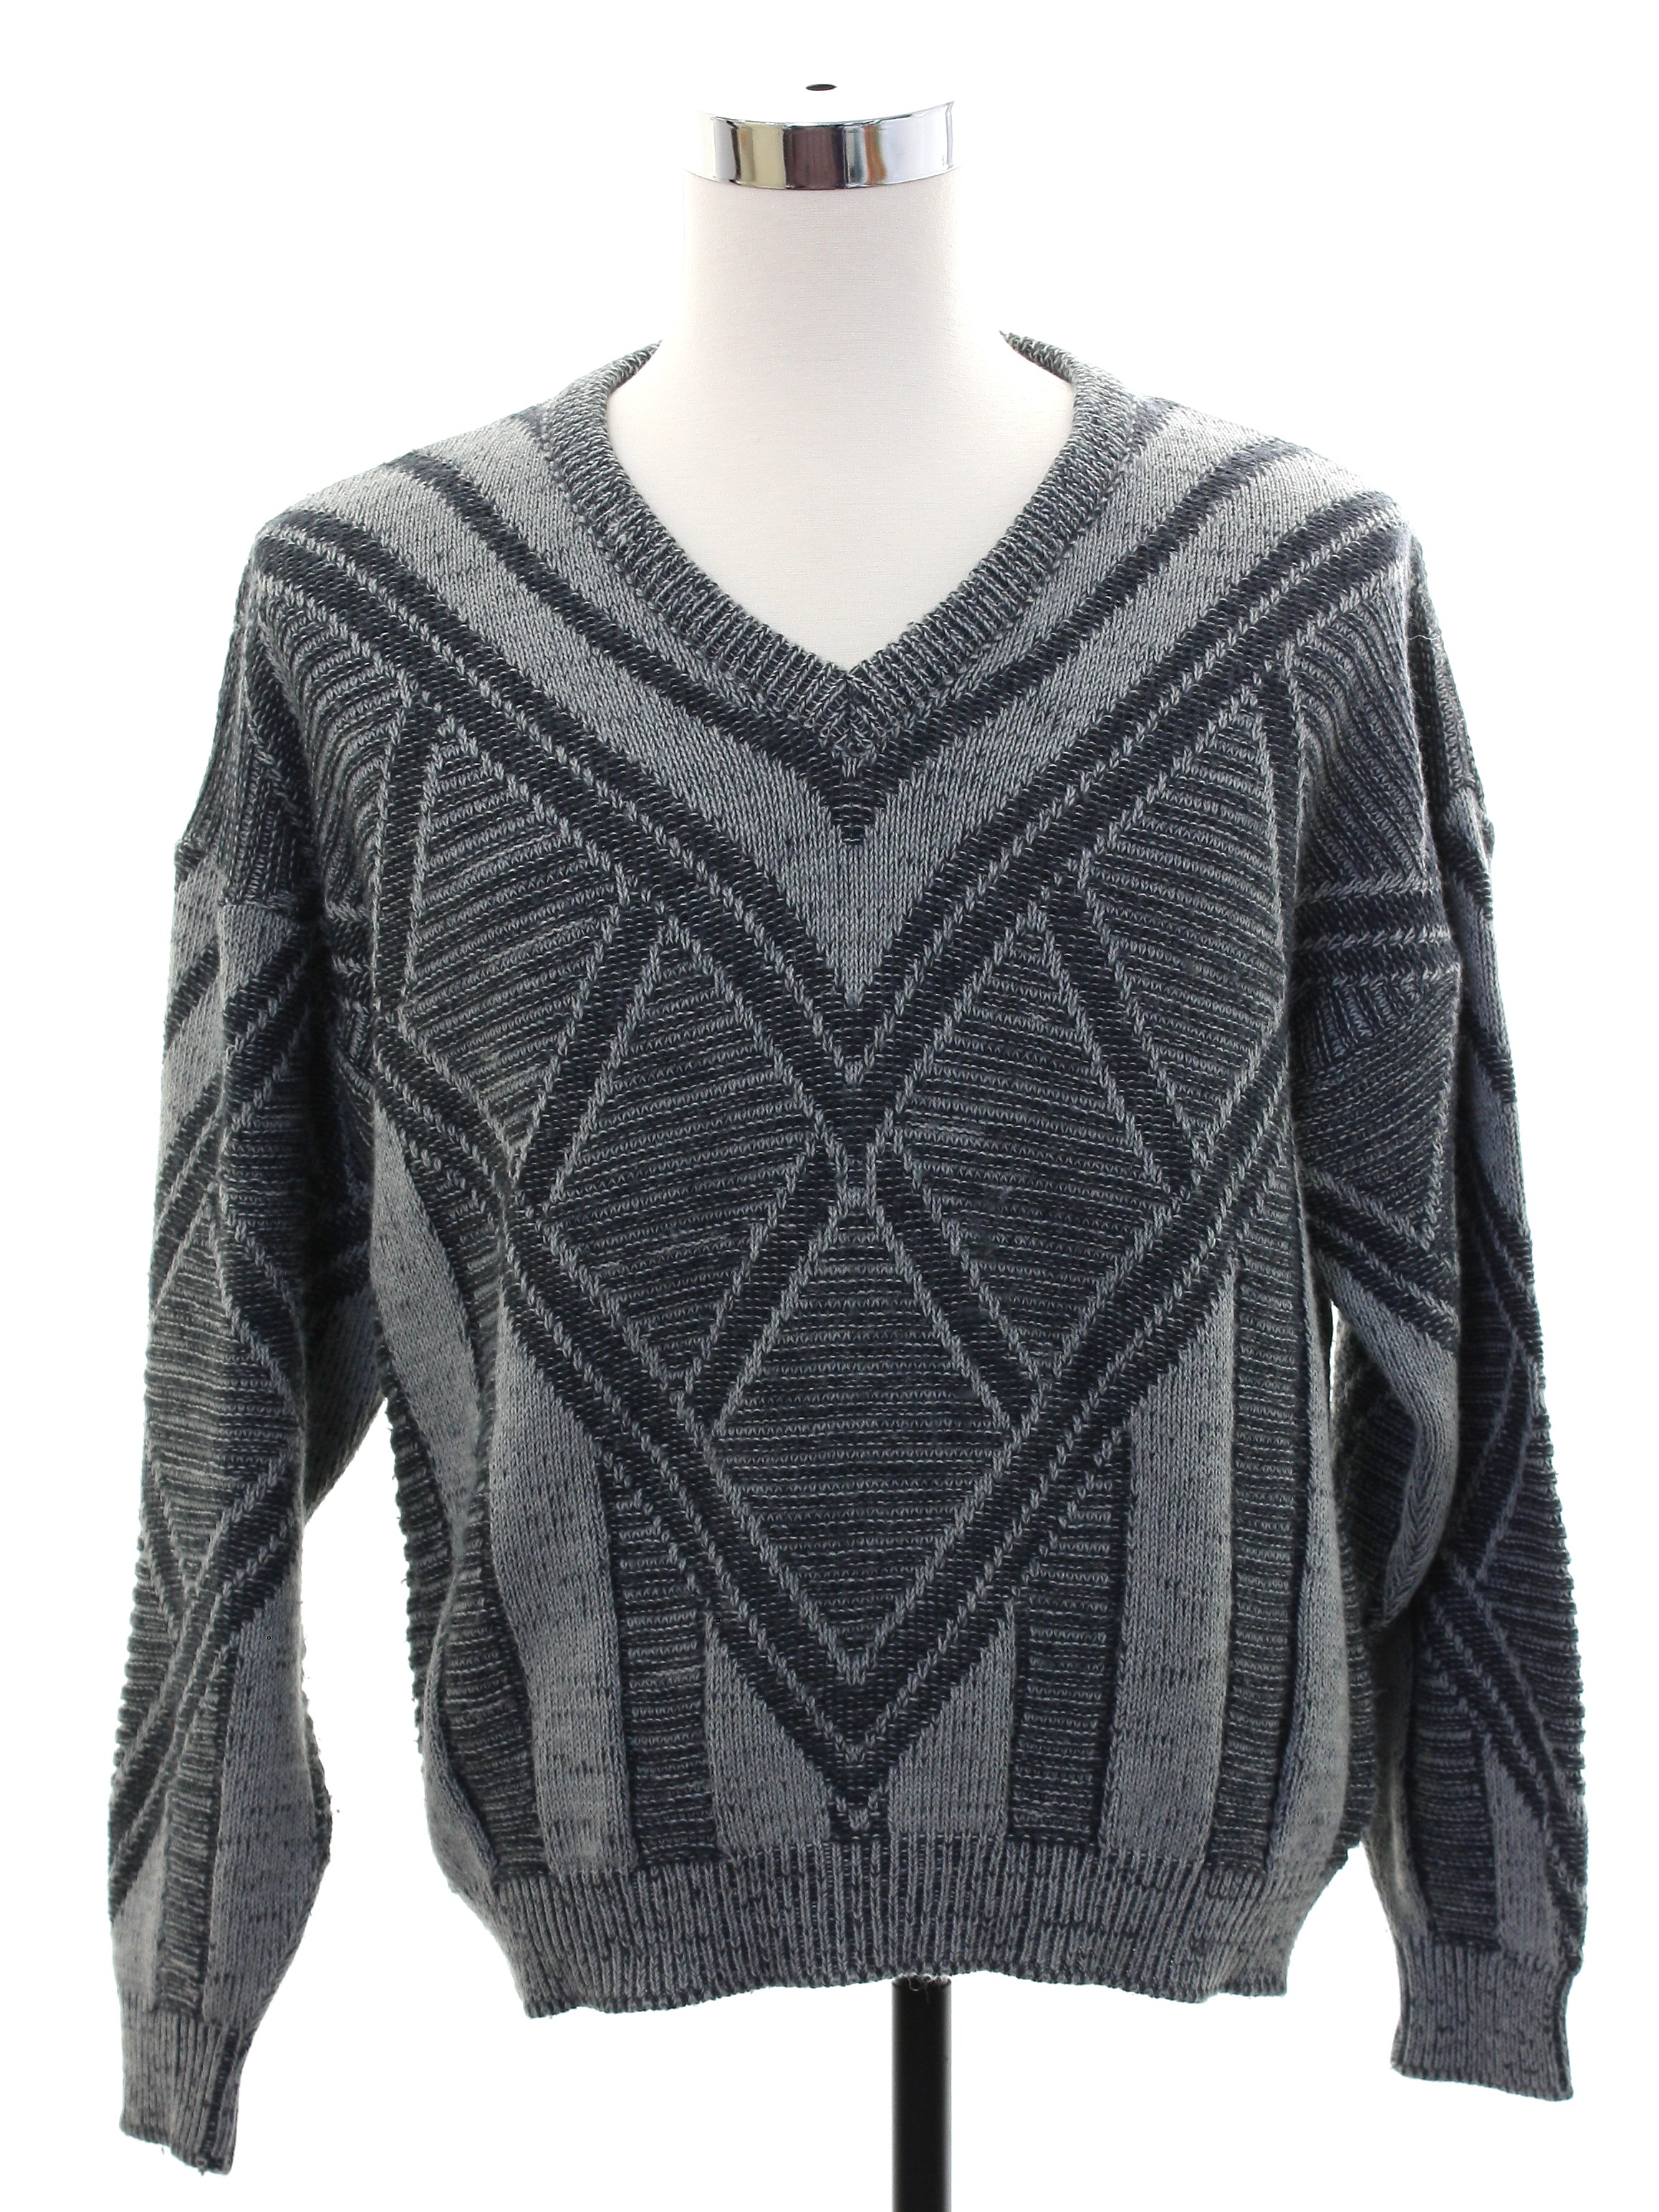 Retro 1980's Sweater: 80s -No Label- Mens shades of gray background ...